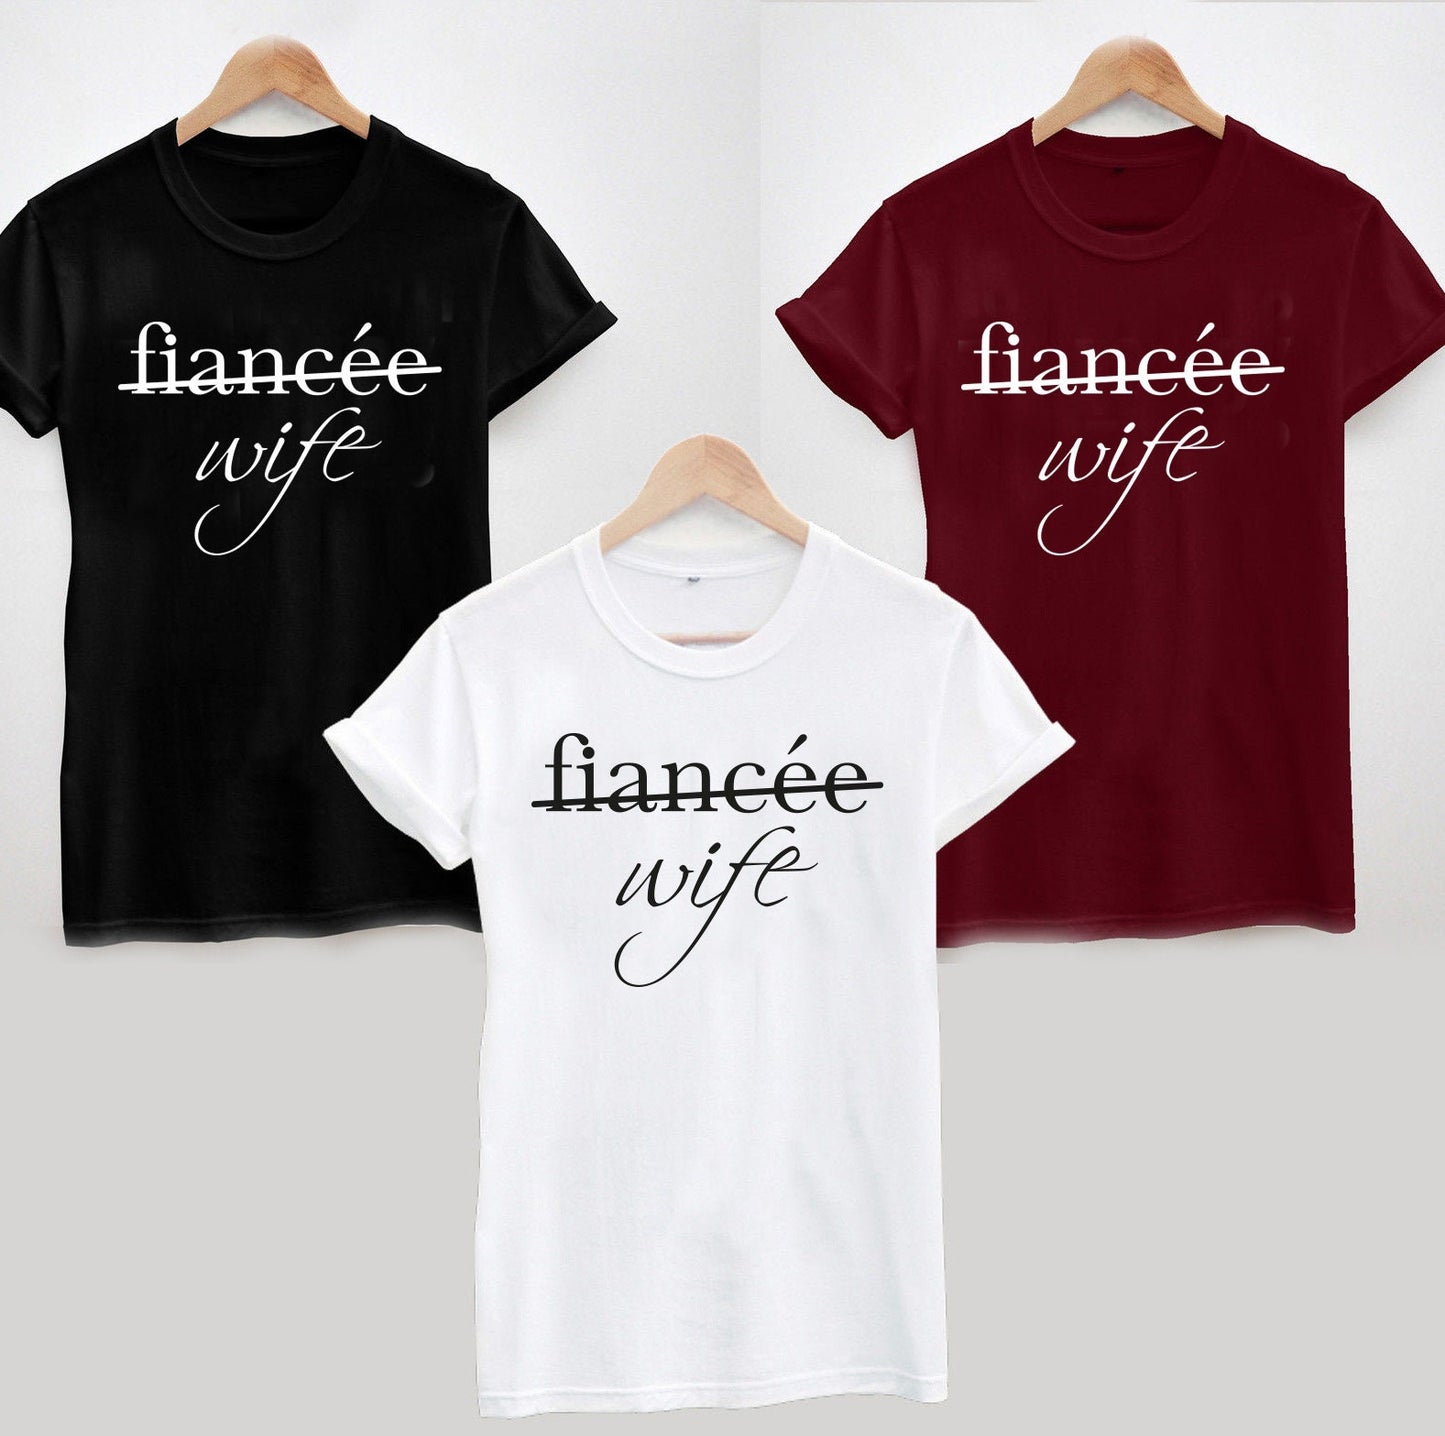 Fiance / Wife T-Shirt, Ladies or Unisex Funny Cool Wedding Gift